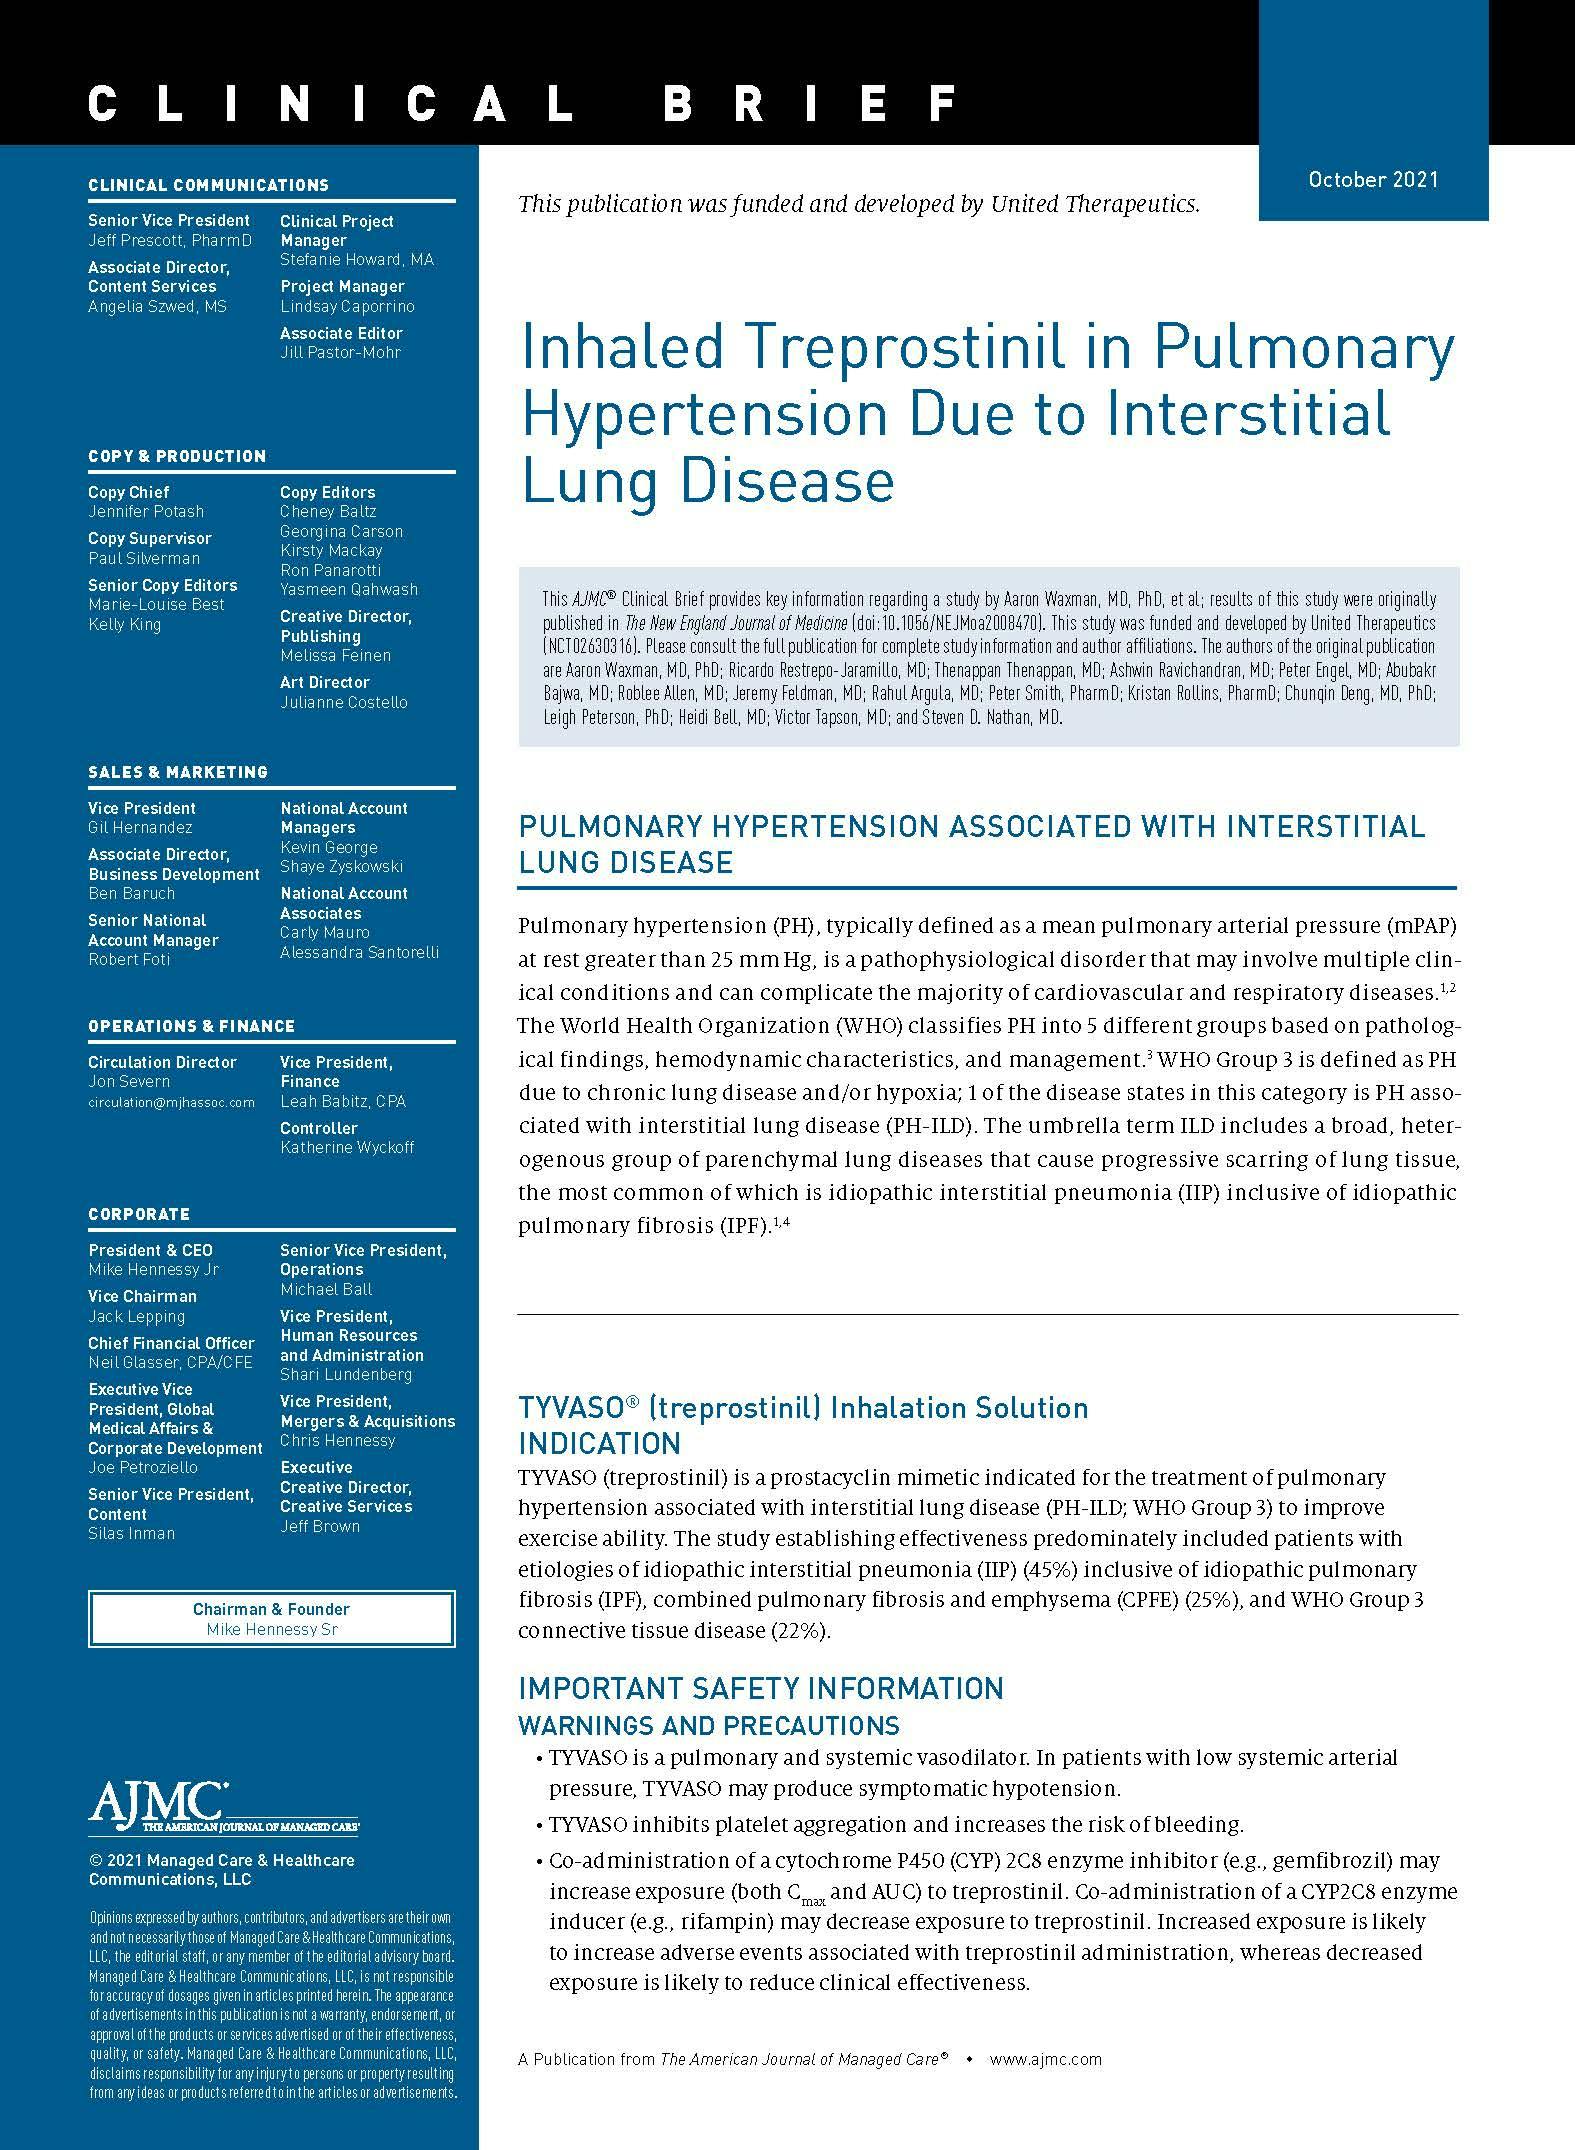 Inhaled Treprostinil in Pulmonary Hypertension Due to Interstitial Lung Disease